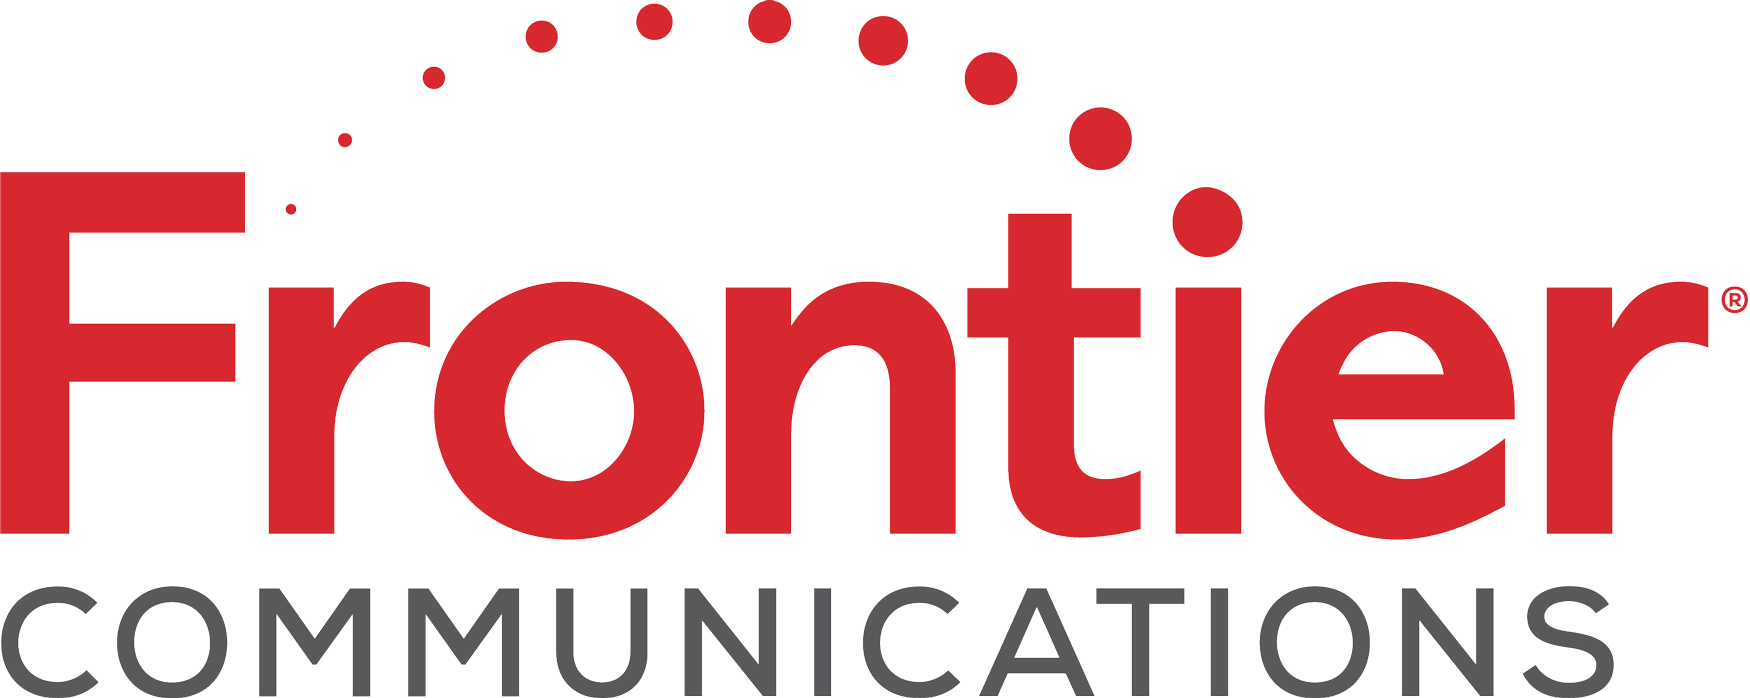 frontier communications